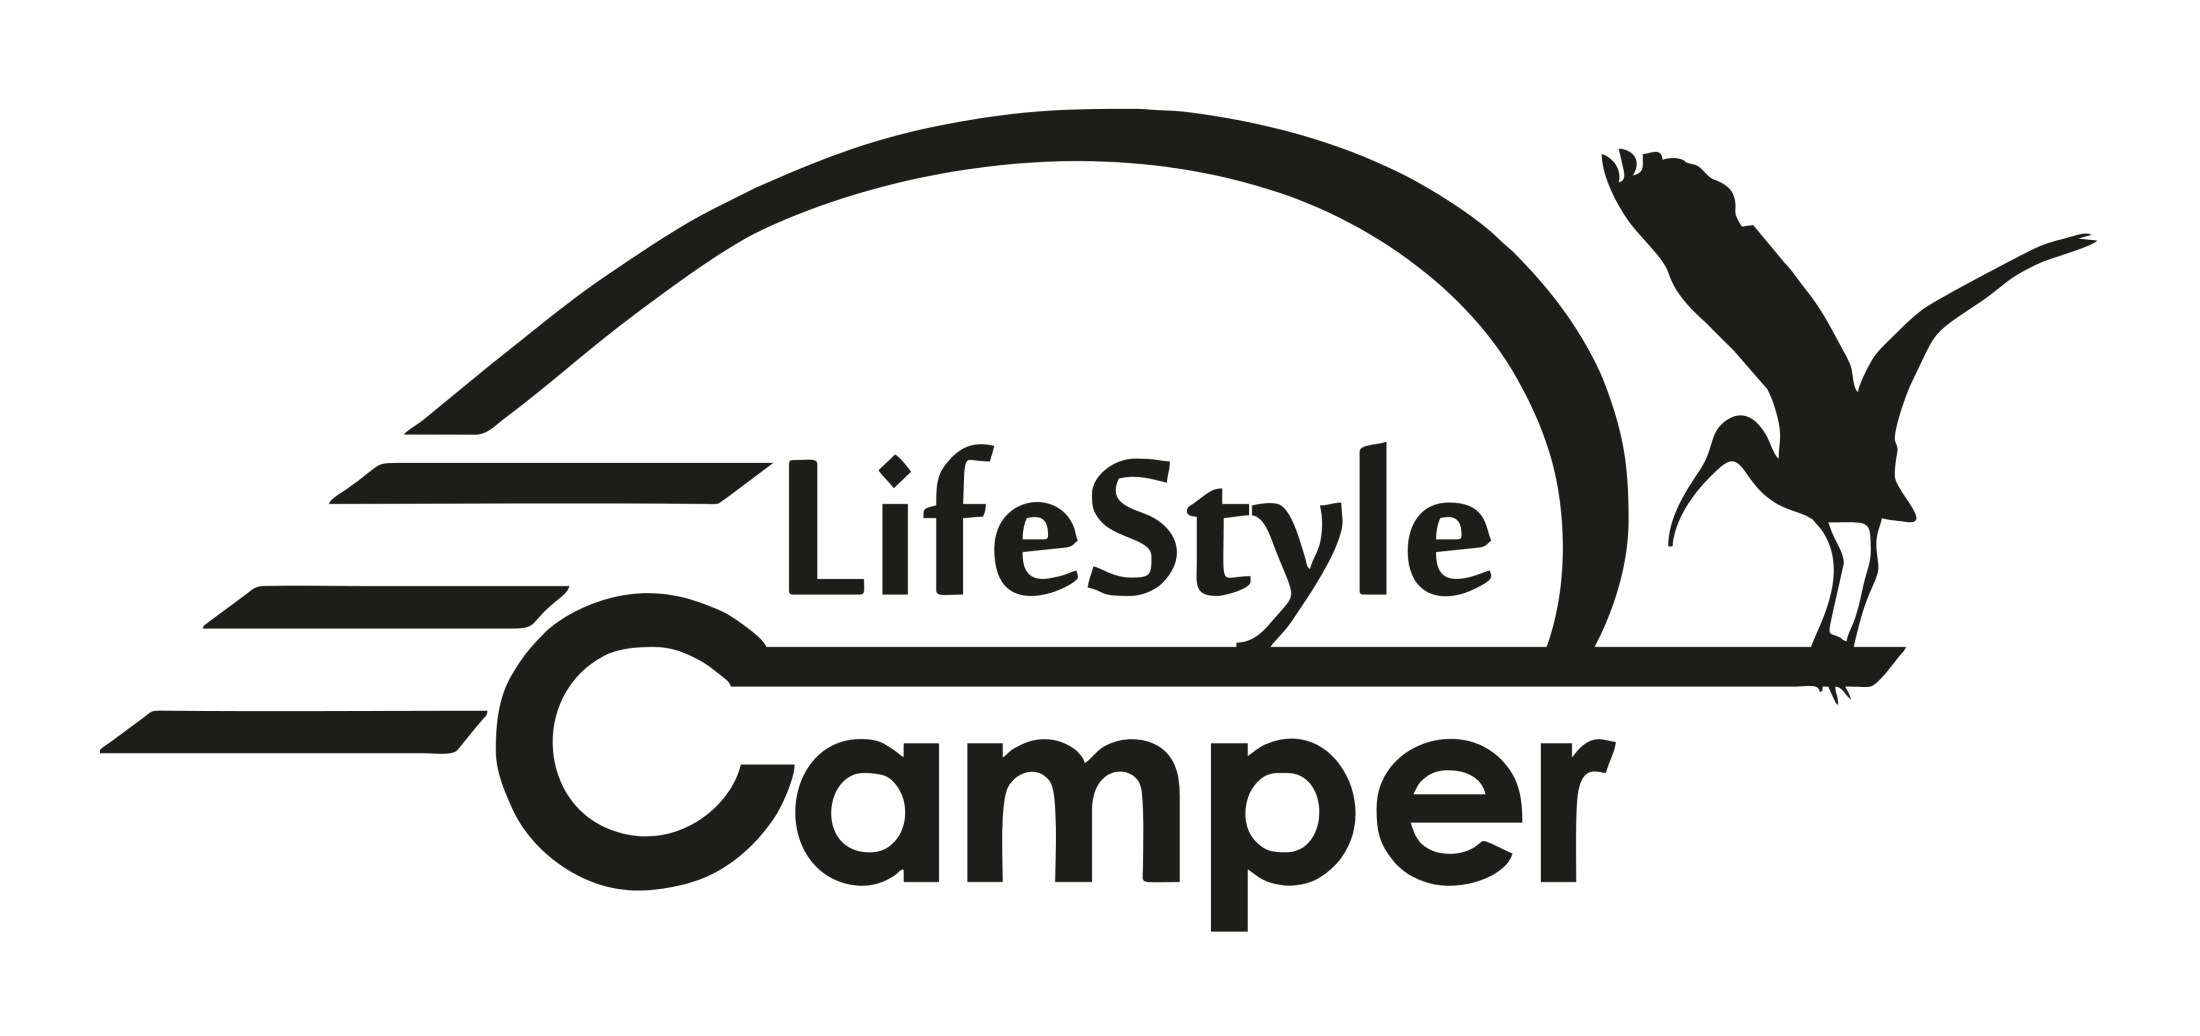 LIFE STYLE CAMPER